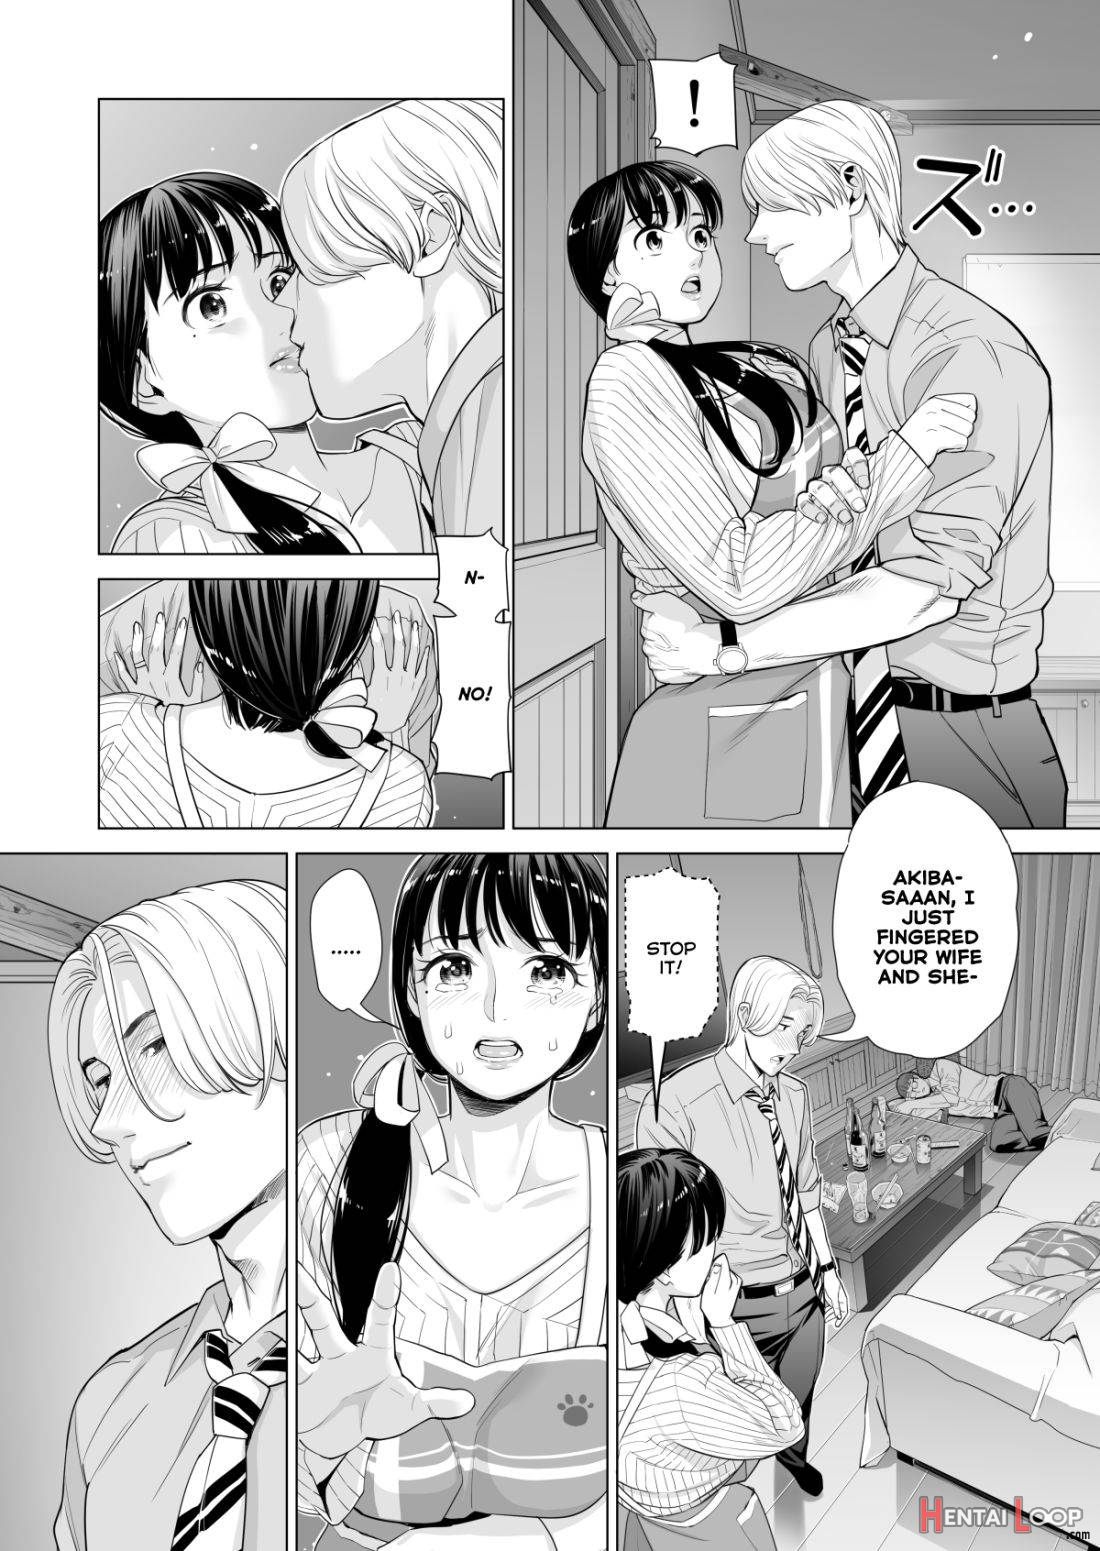 Tsukiyo no Midare Zake (Zenpen) Moonlit Intoxication ~ A Housewife Stolen by a Coworker Besides her Blackout Drunk Husband ~ Chapter 1 page 38